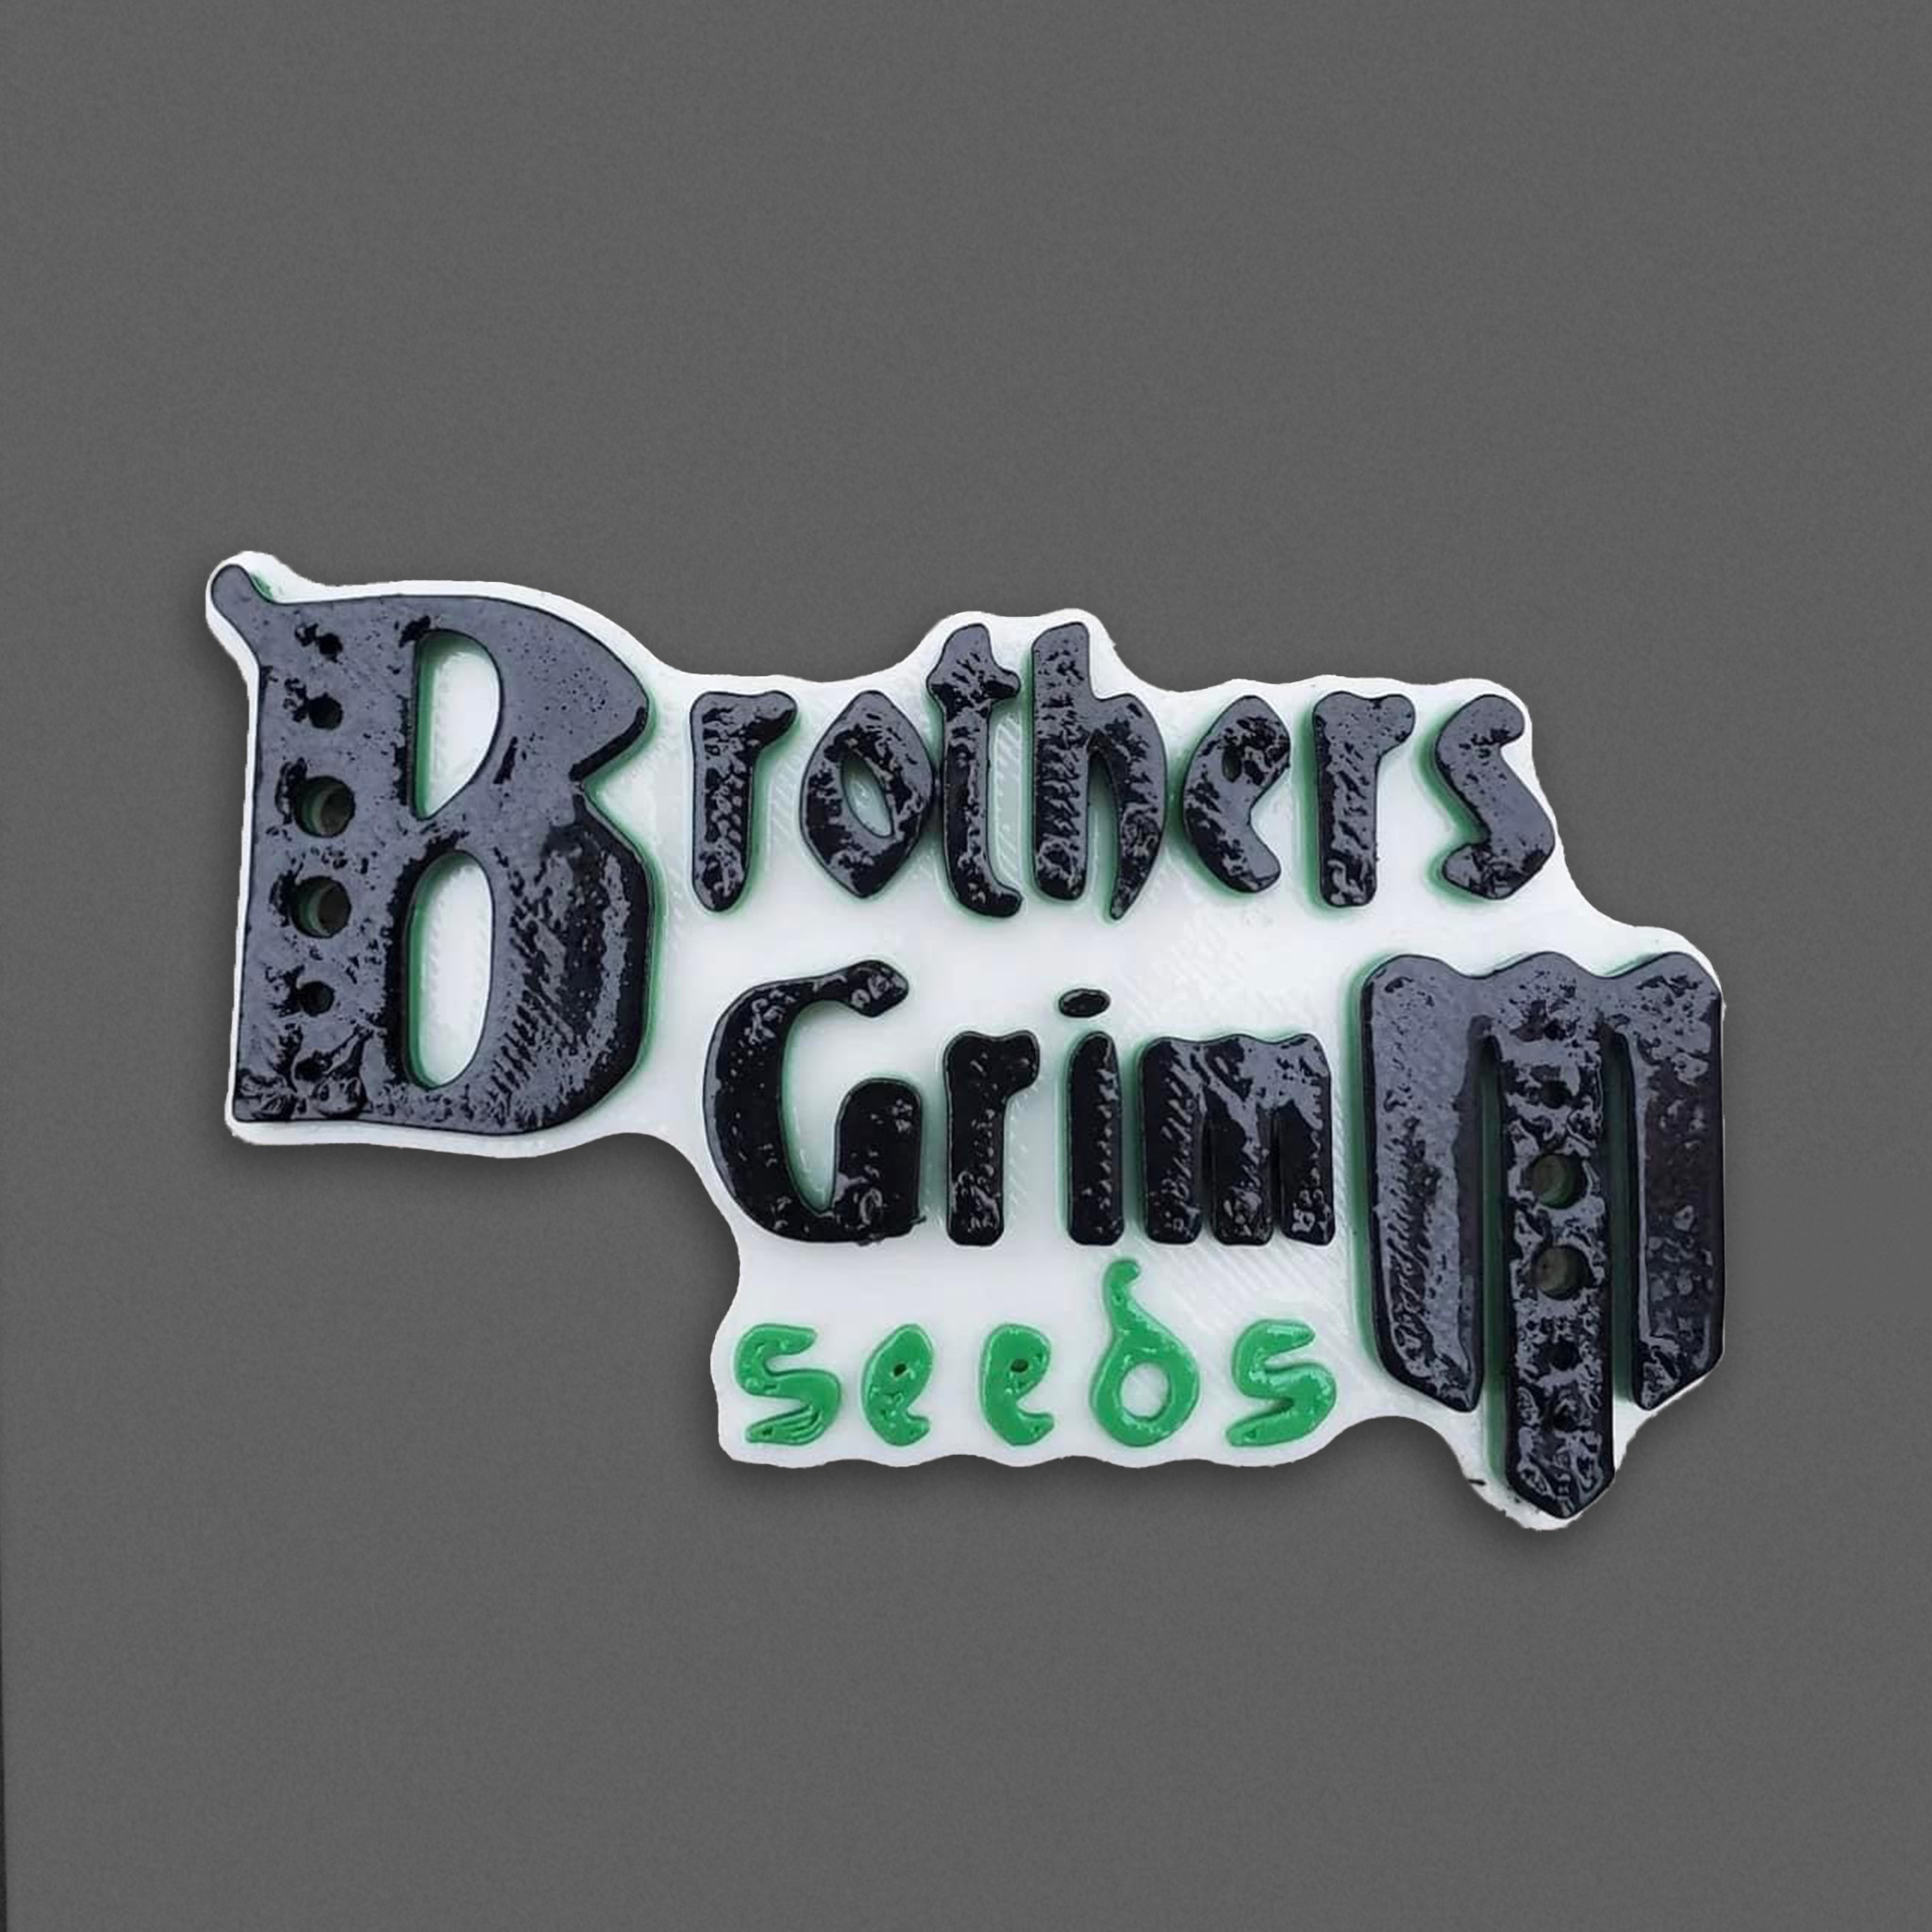 Brothers Grimm Seeds magnet